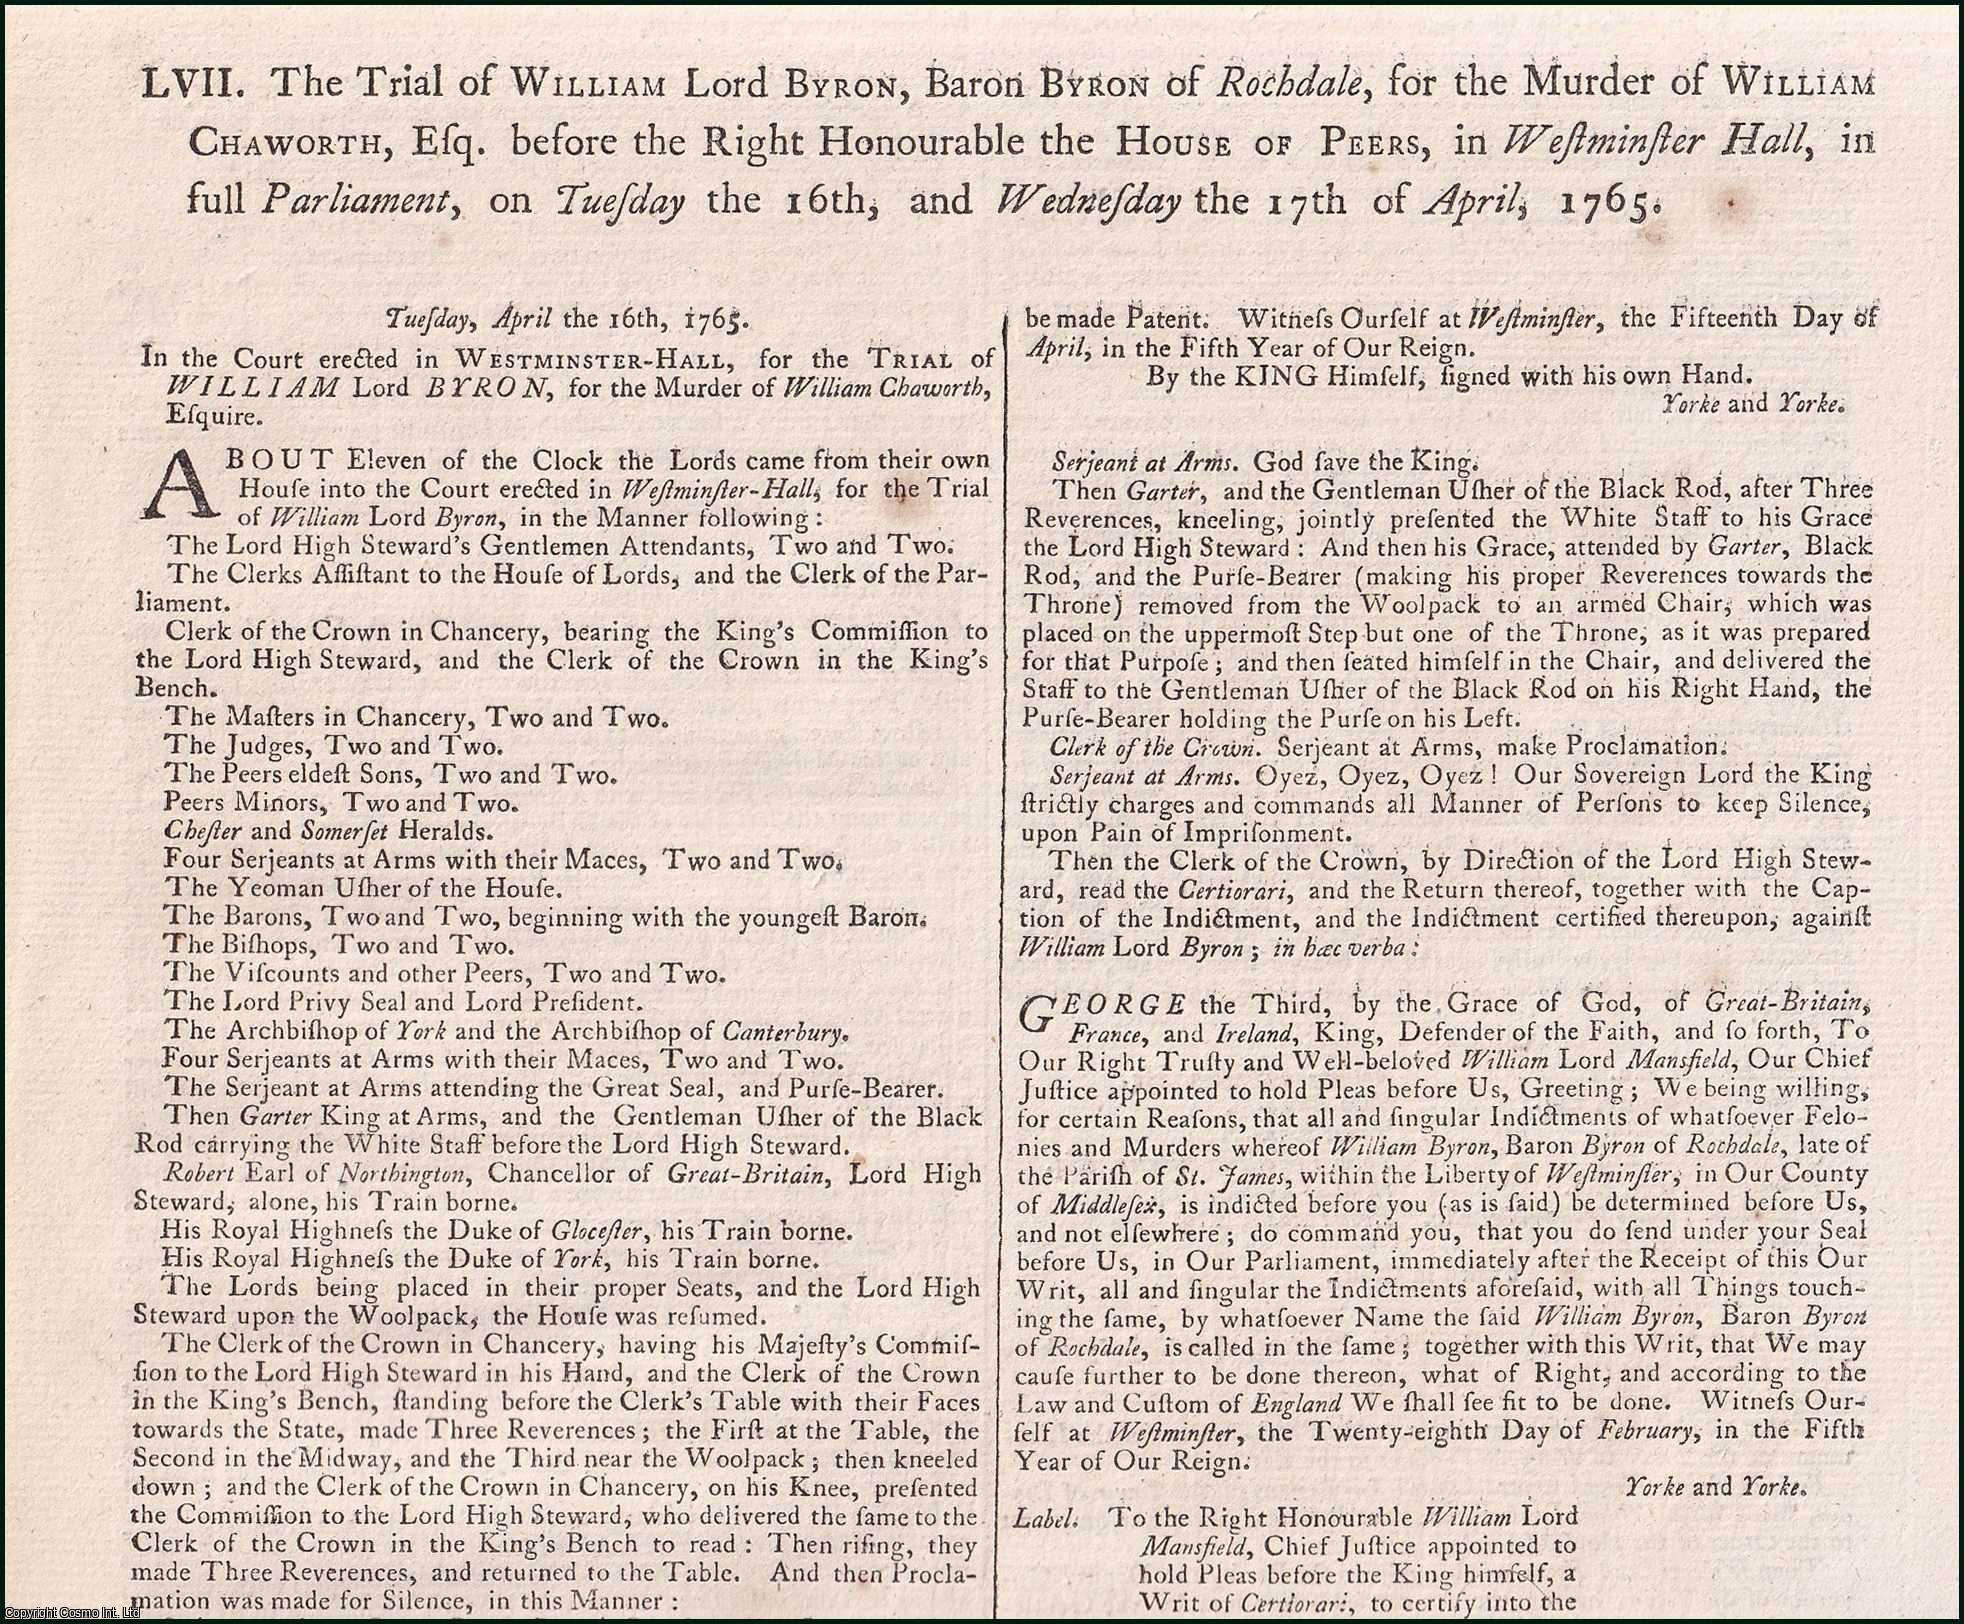 [Trial]. - The Trial of William Lord Byron, Baron Byron of Rochdale, for the Murder of William Chaworth, Esq. before the Right Honourable the House of Peers, in Westminster Hall, in full Parliament, on Tuesday the 16th, and Wednesday the 17th of April, 1765. An original report from the Collected State Trials.